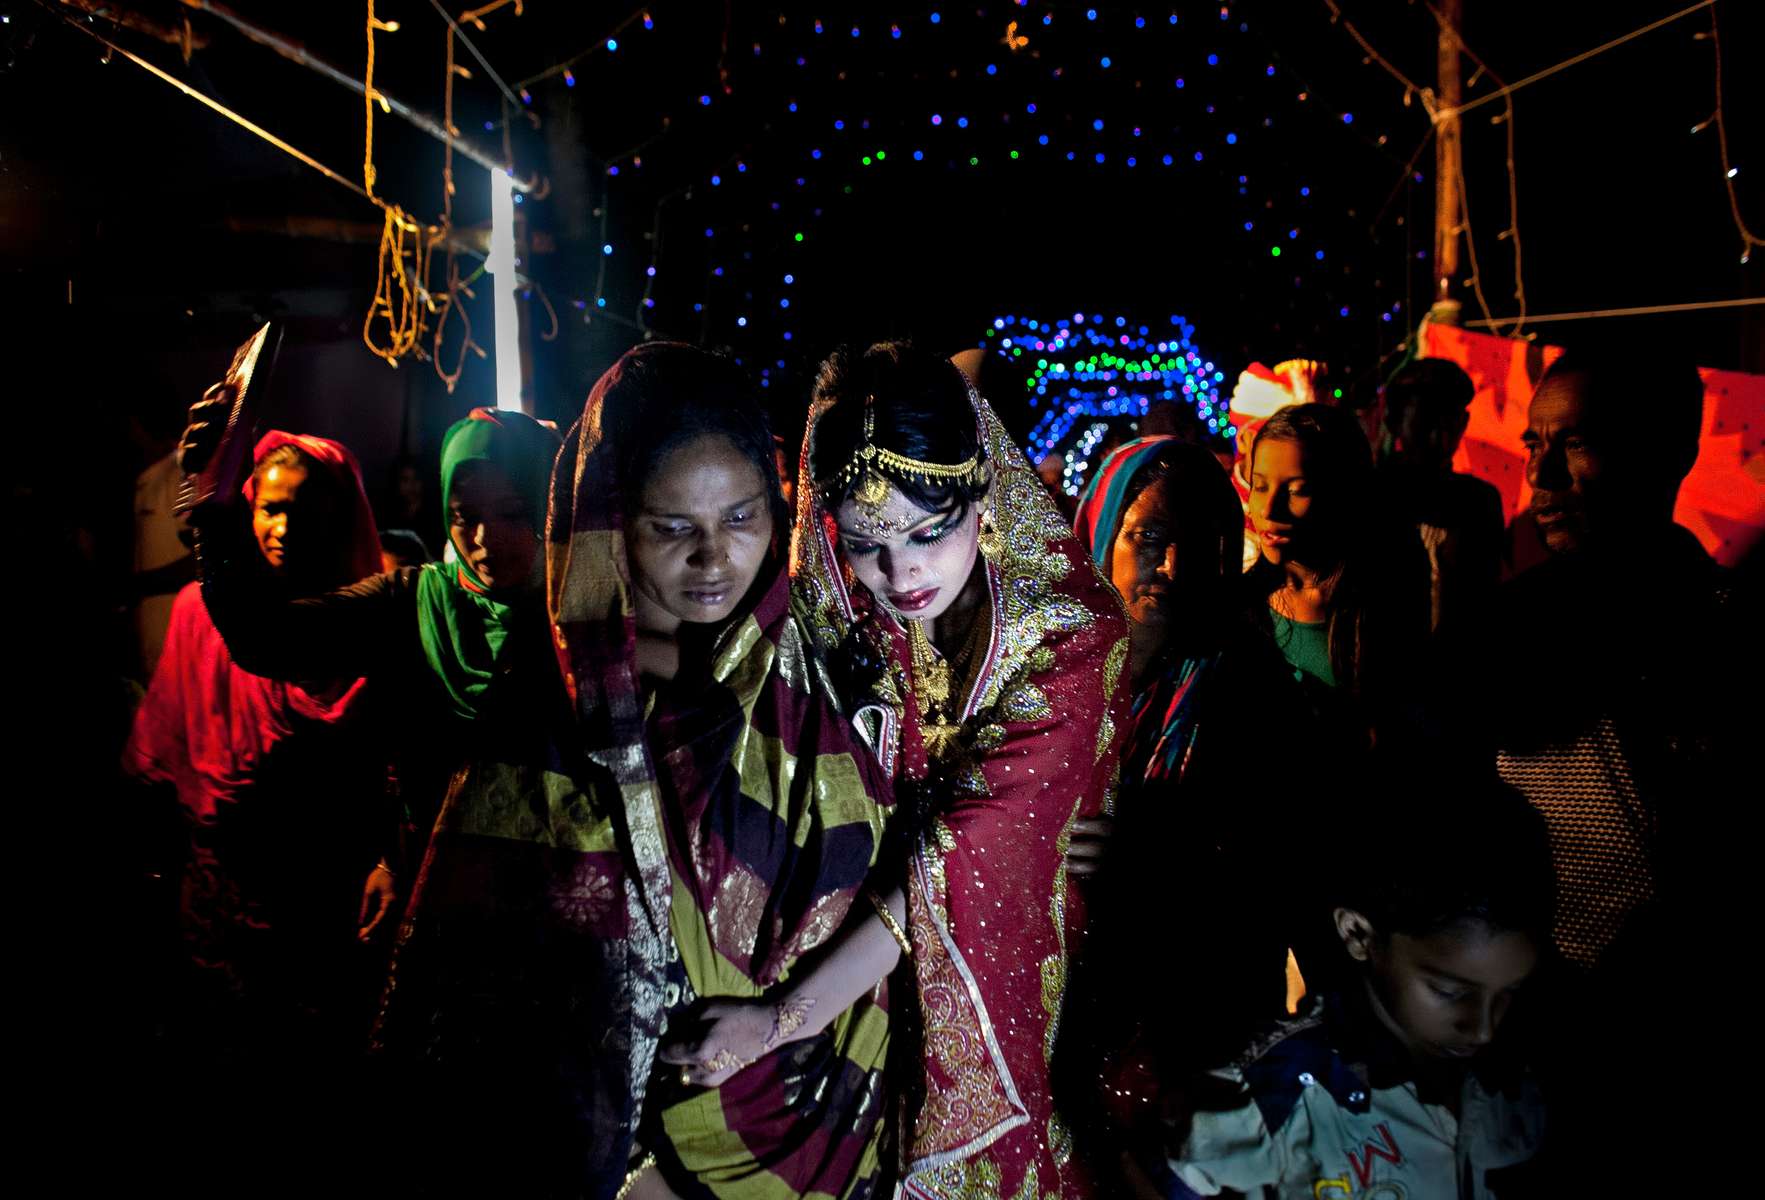 15 year old Nasoin Akhter is led by relatives to a car that will take her to her new home on the day of her wedding to a 32 year old man in Manikganj, Bangladesh. 